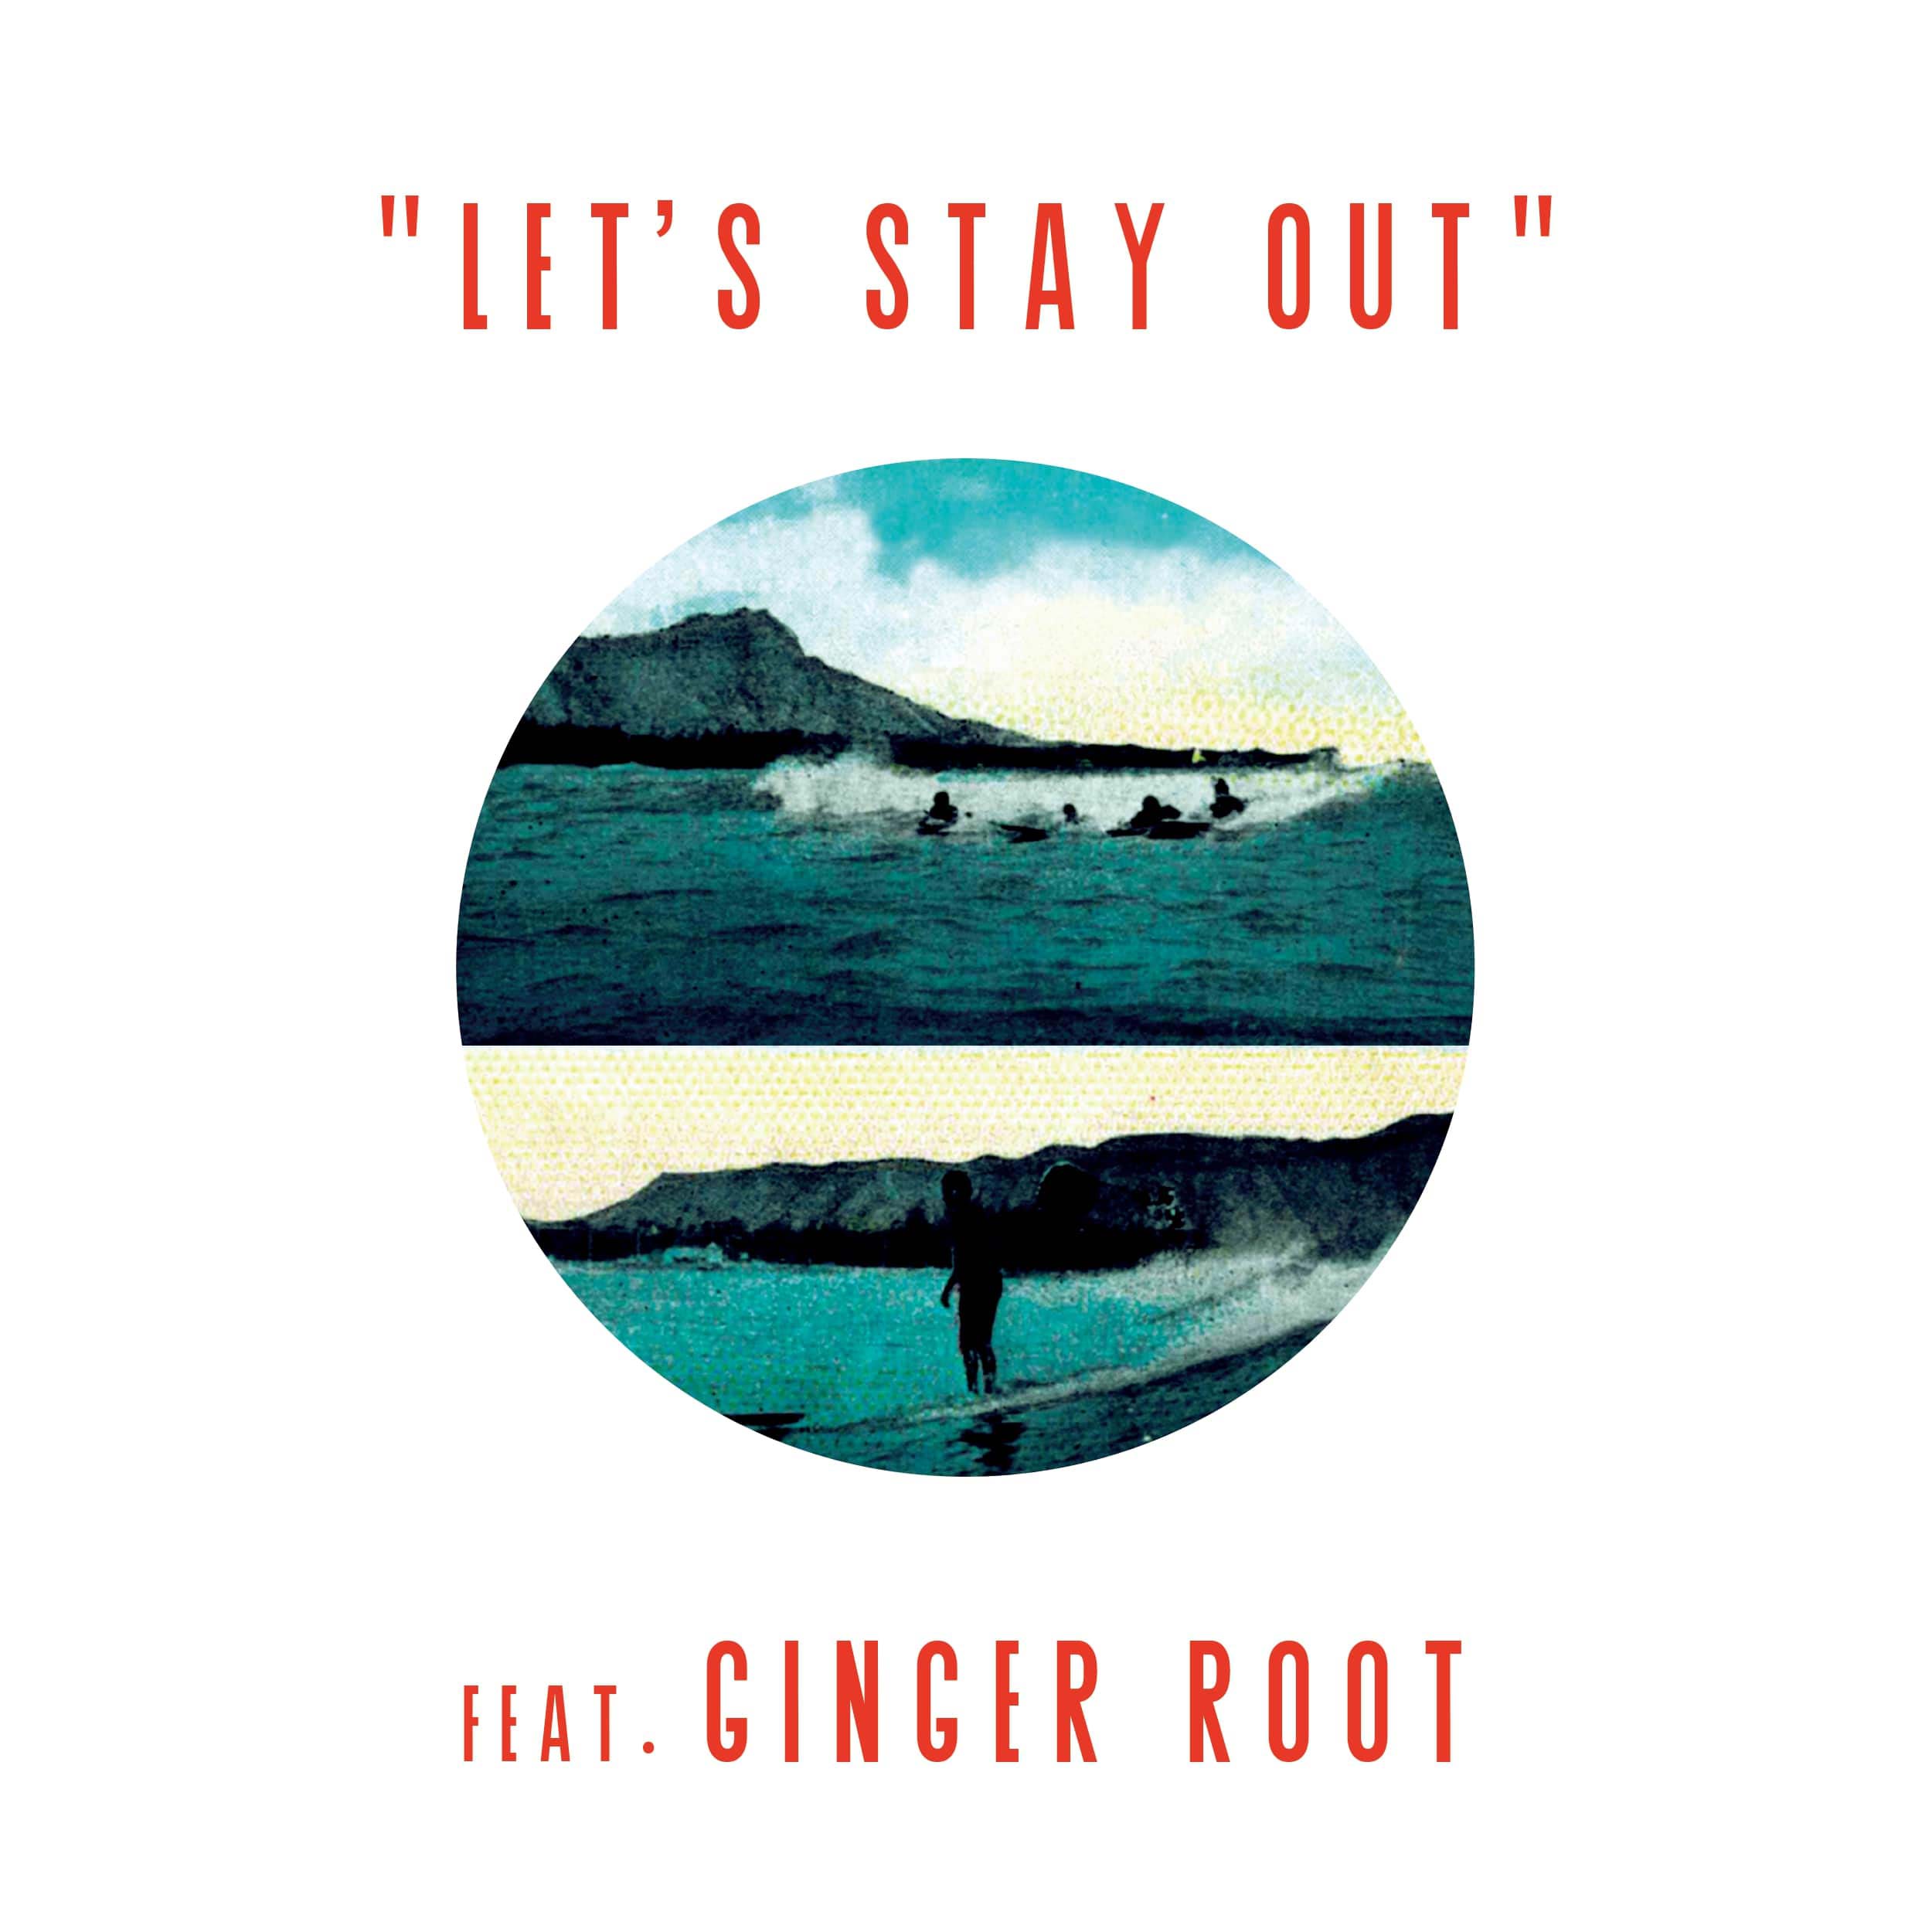 Let's Stay Out feat. Ginger Root